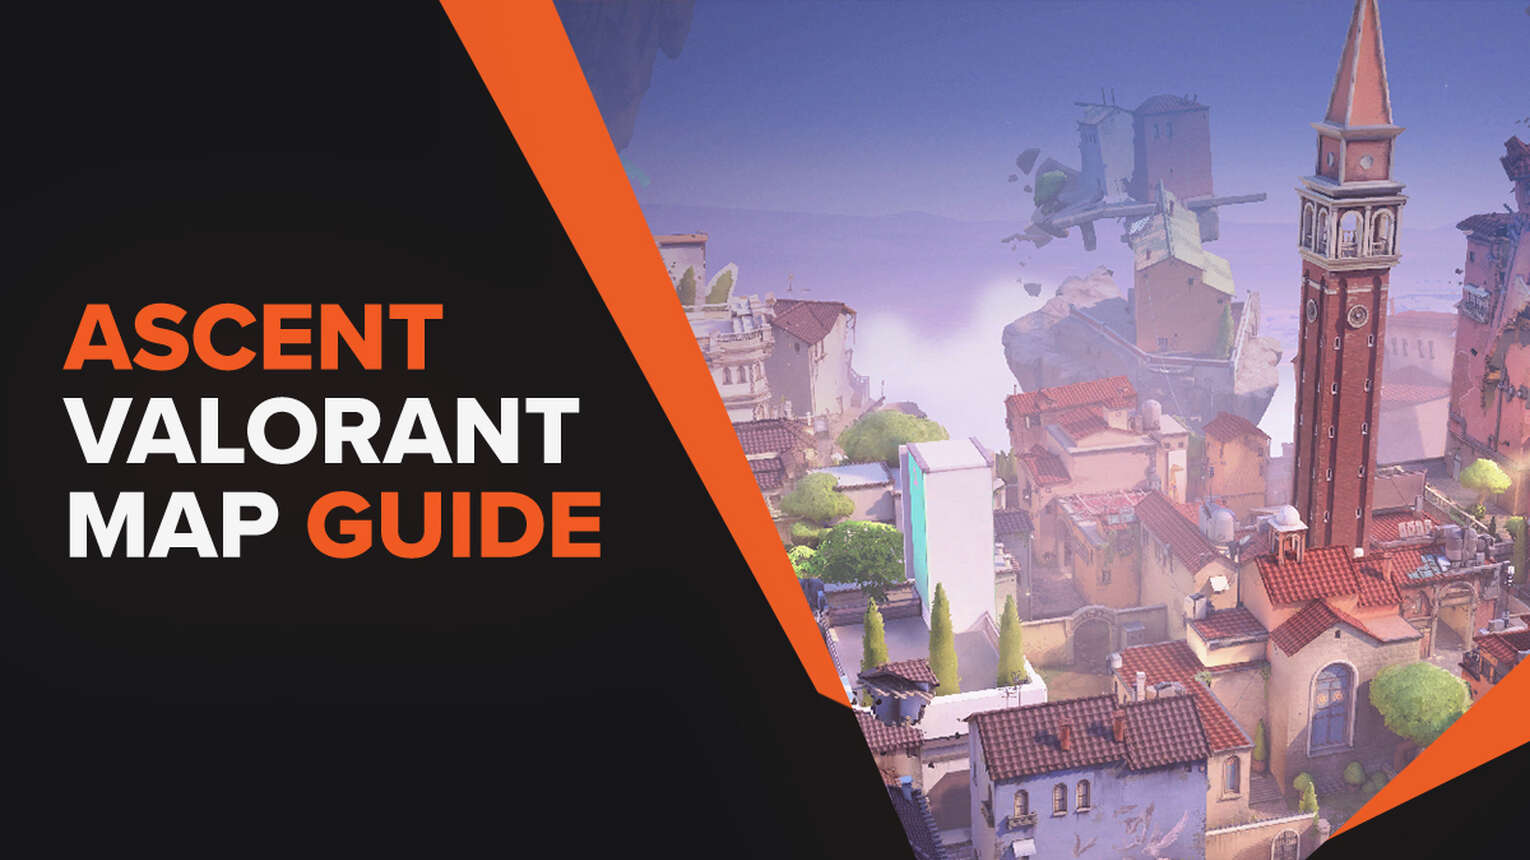 The complete Ascent Valorant map guide